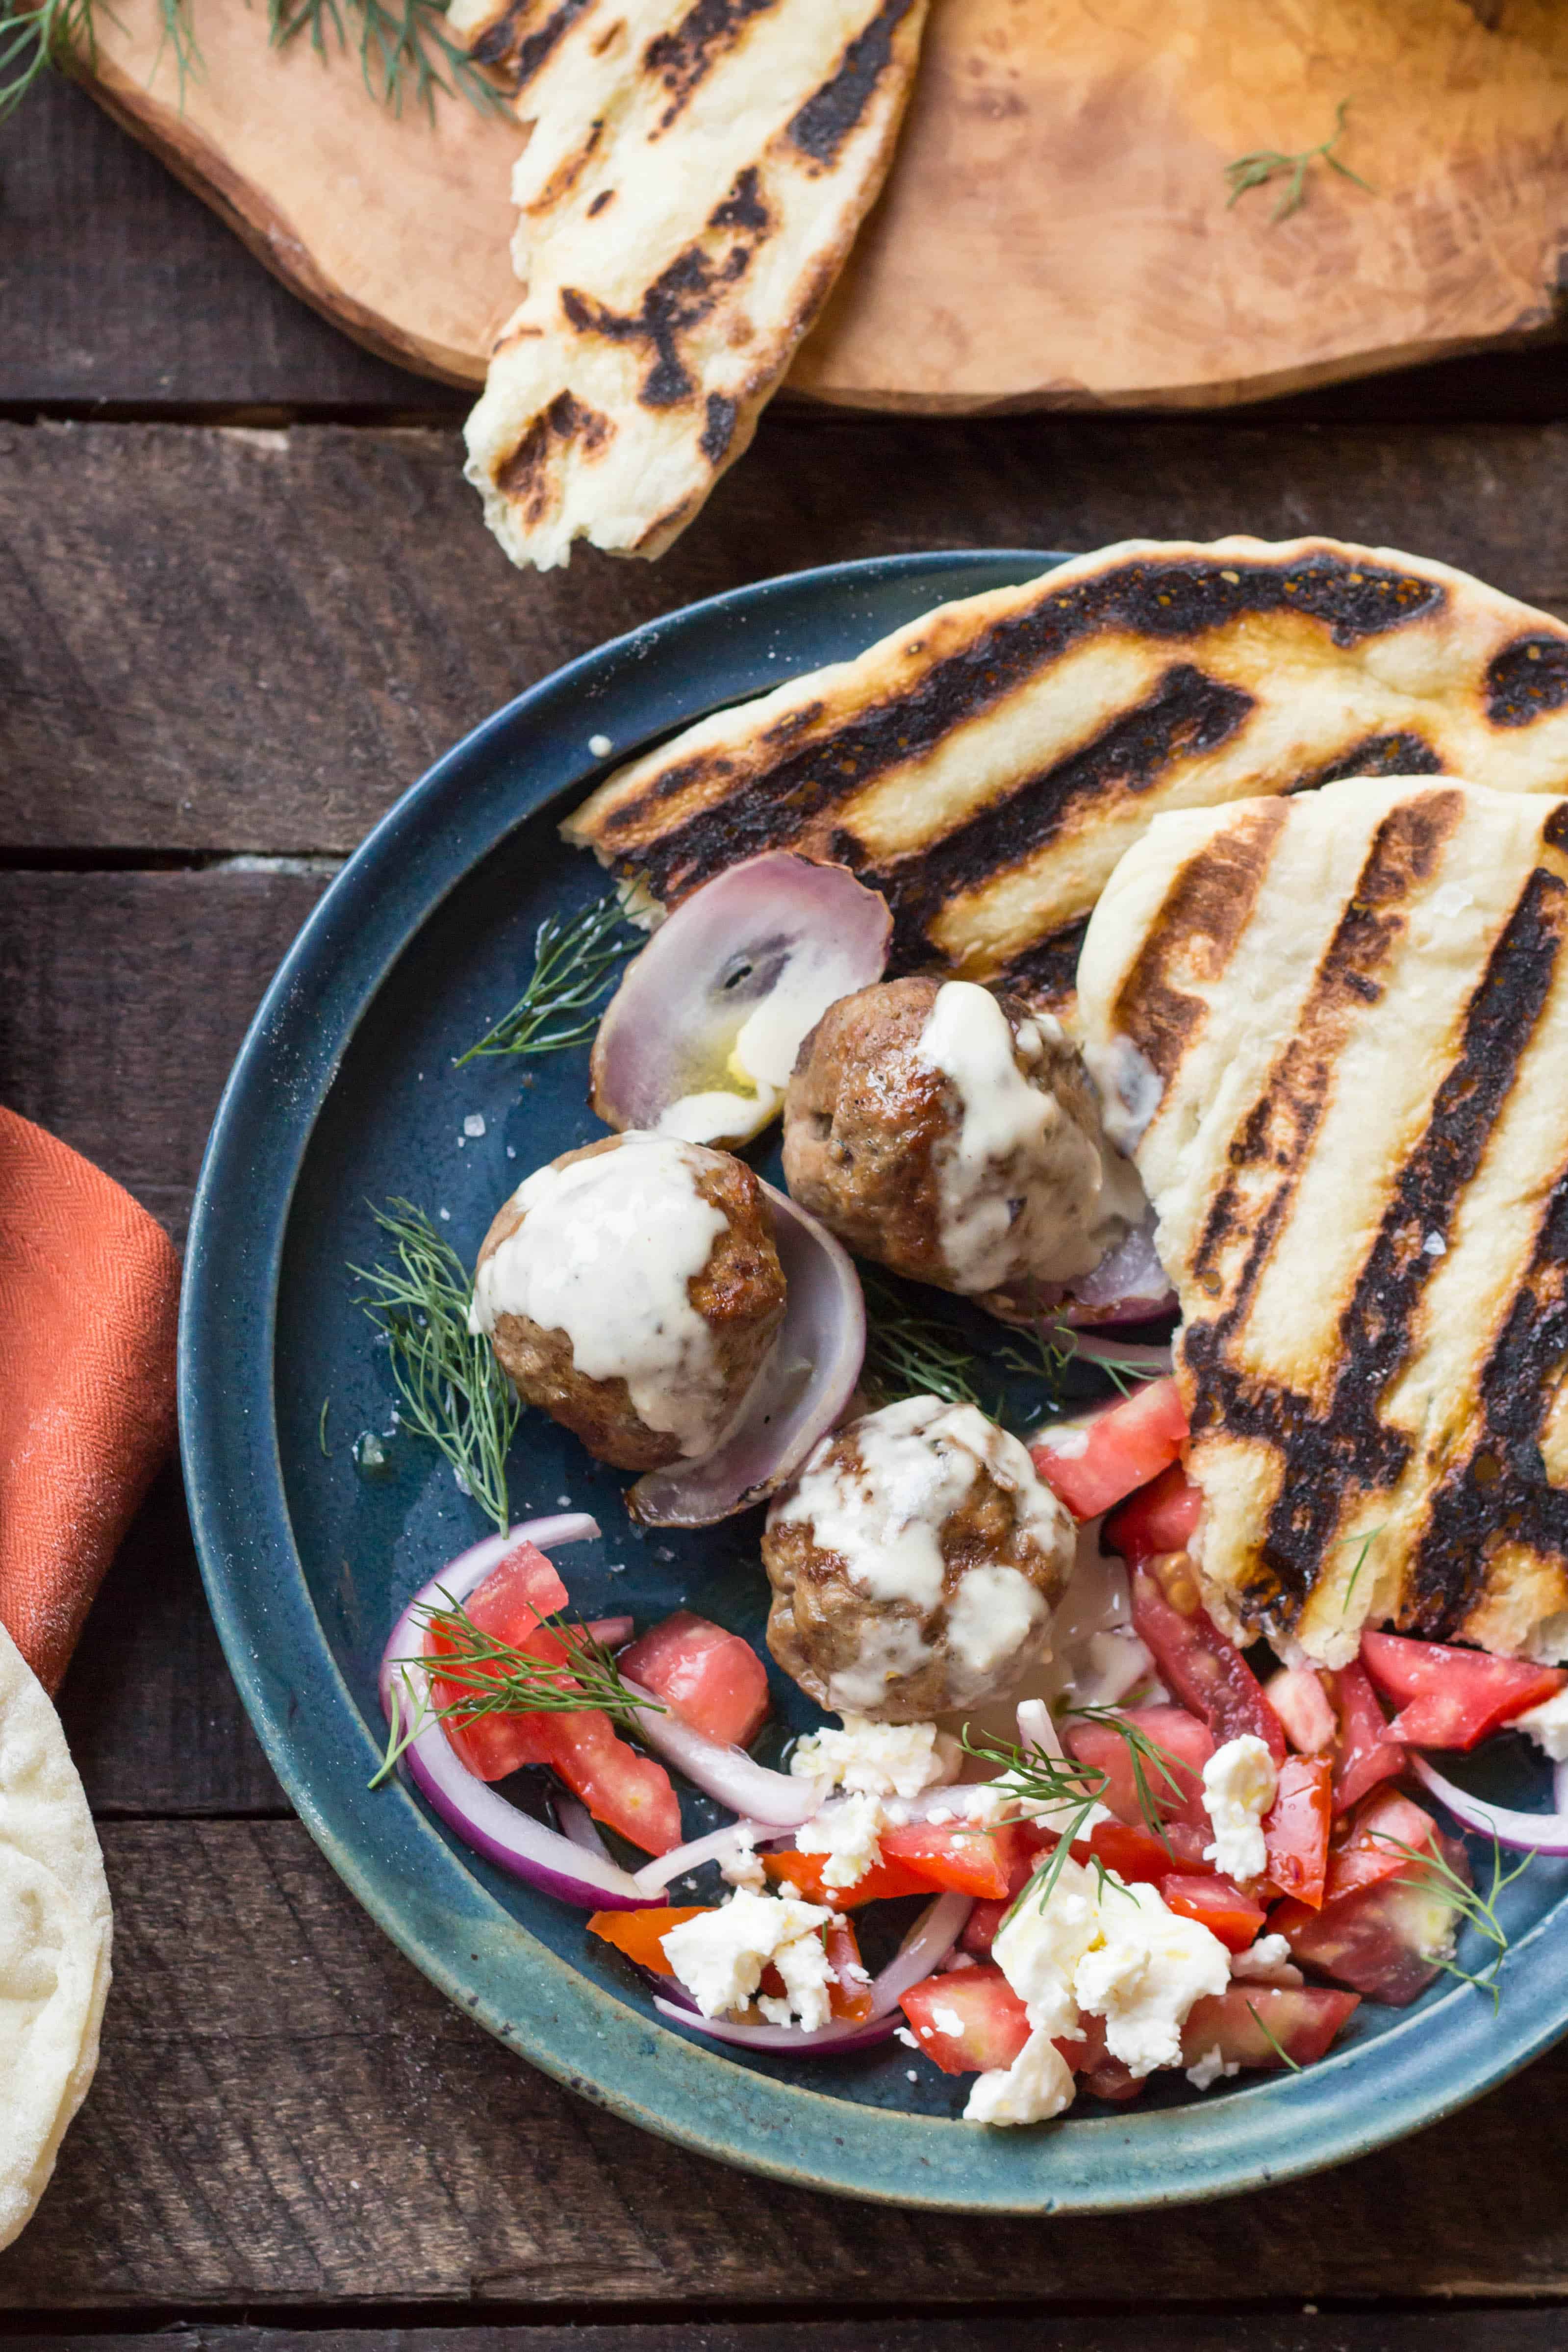 Top view of a blue dinner plate with grilled pita, lamb meatballs, and tomato salad.